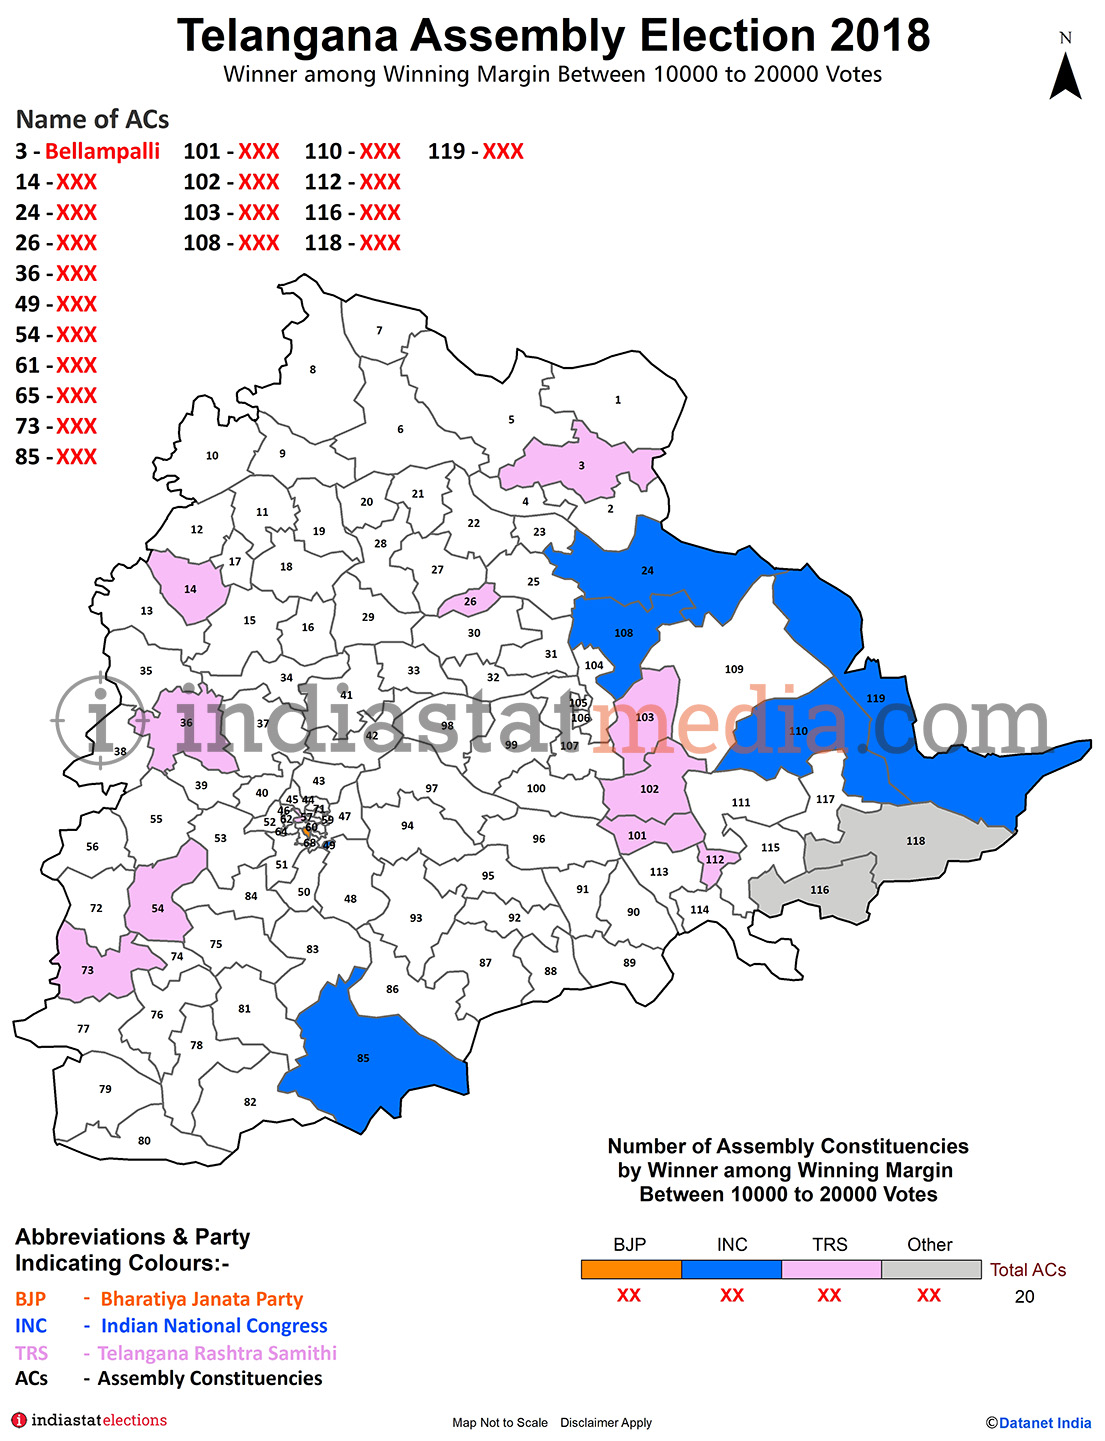 Winner among Winning Margin Between 10000 to 20000 Votes in Telangana Assembly Election - 2018